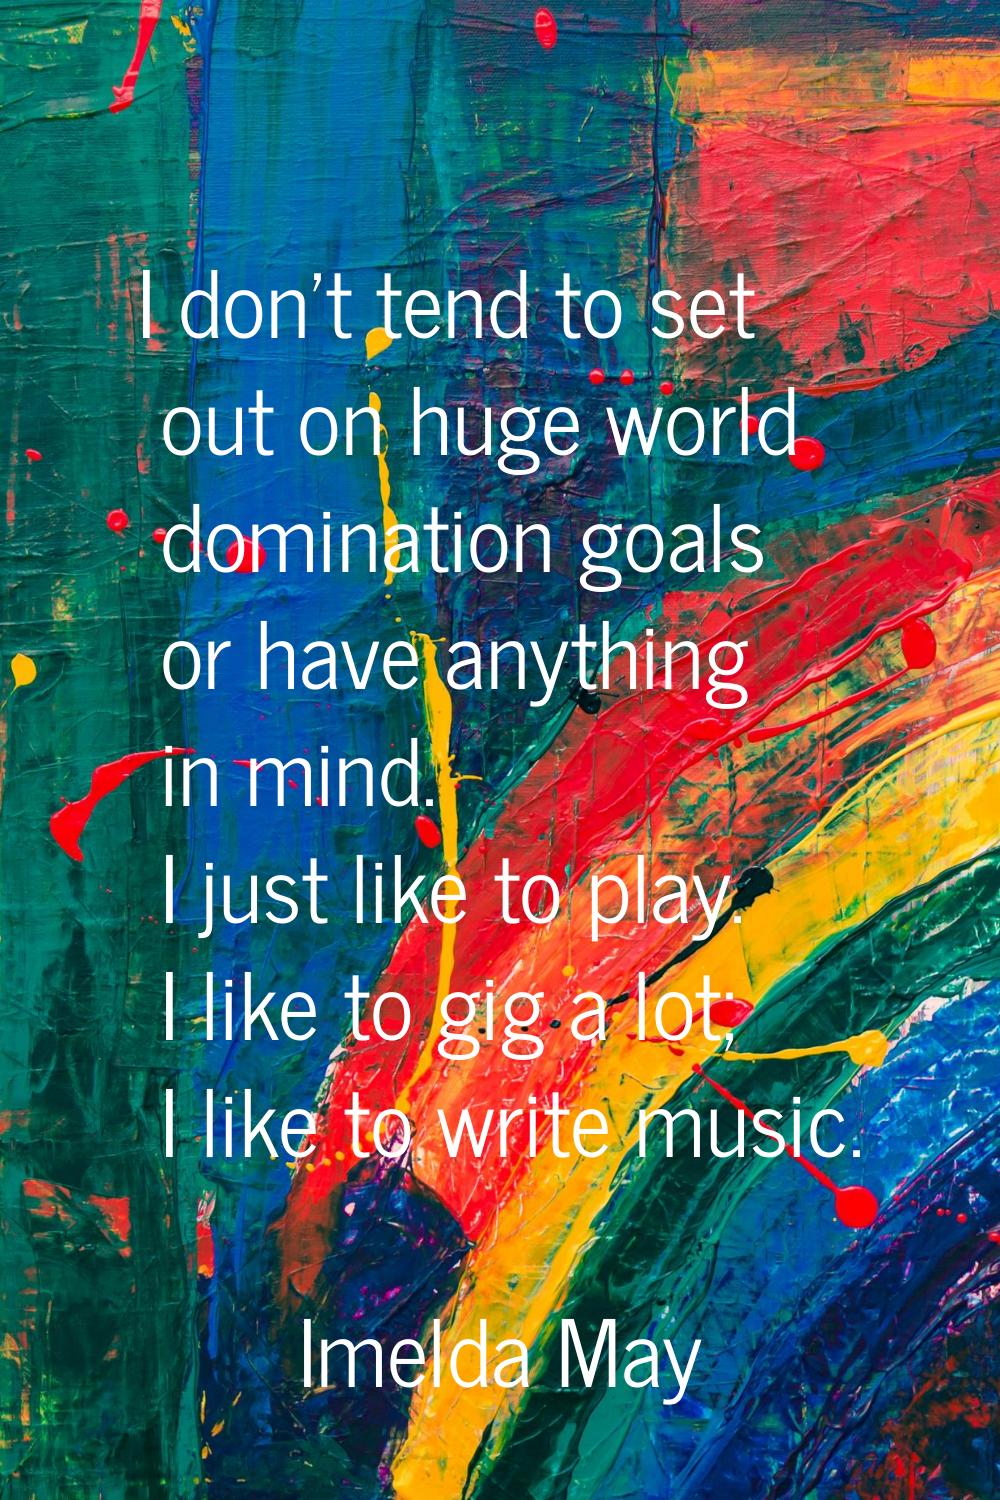 I don't tend to set out on huge world domination goals or have anything in mind. I just like to pla